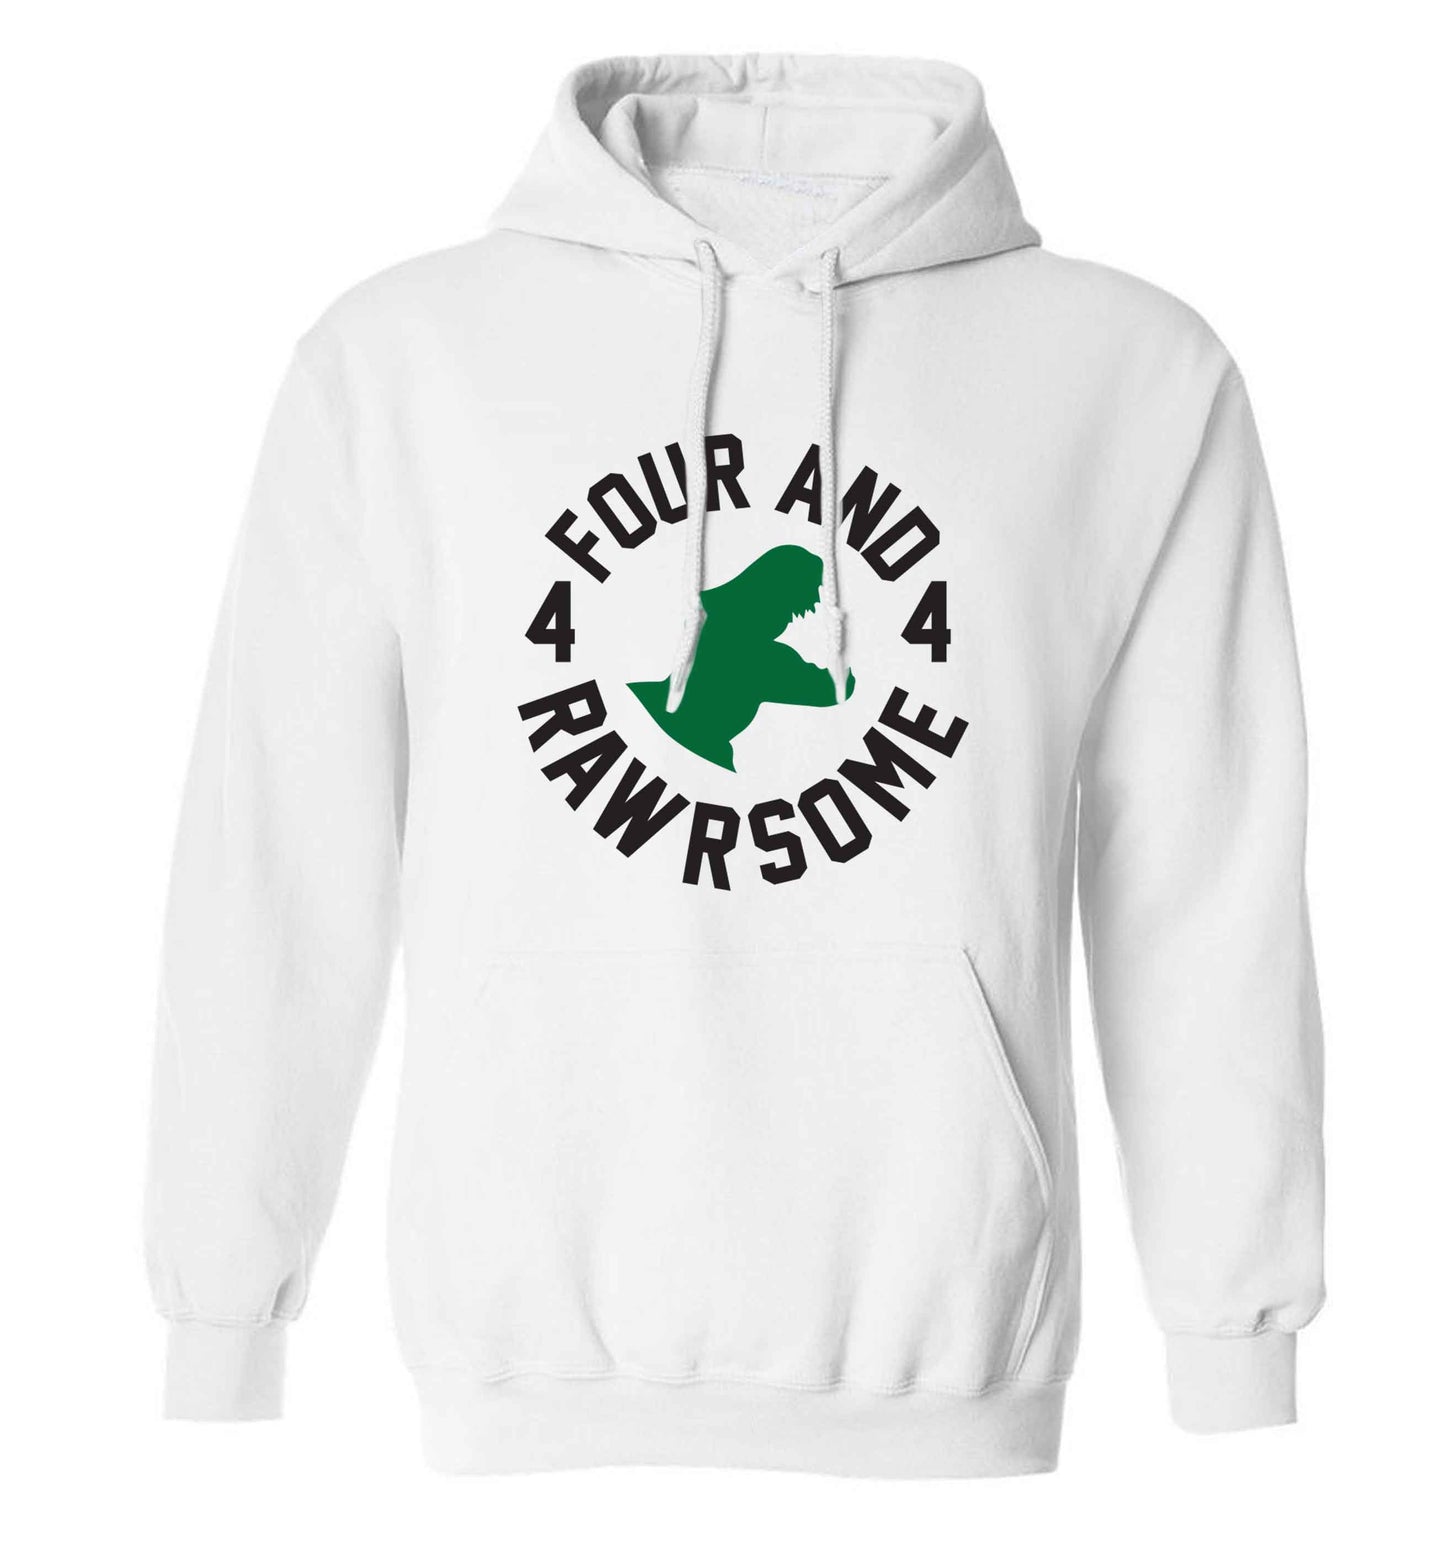 Four and rawrsome adults unisex white hoodie 2XL